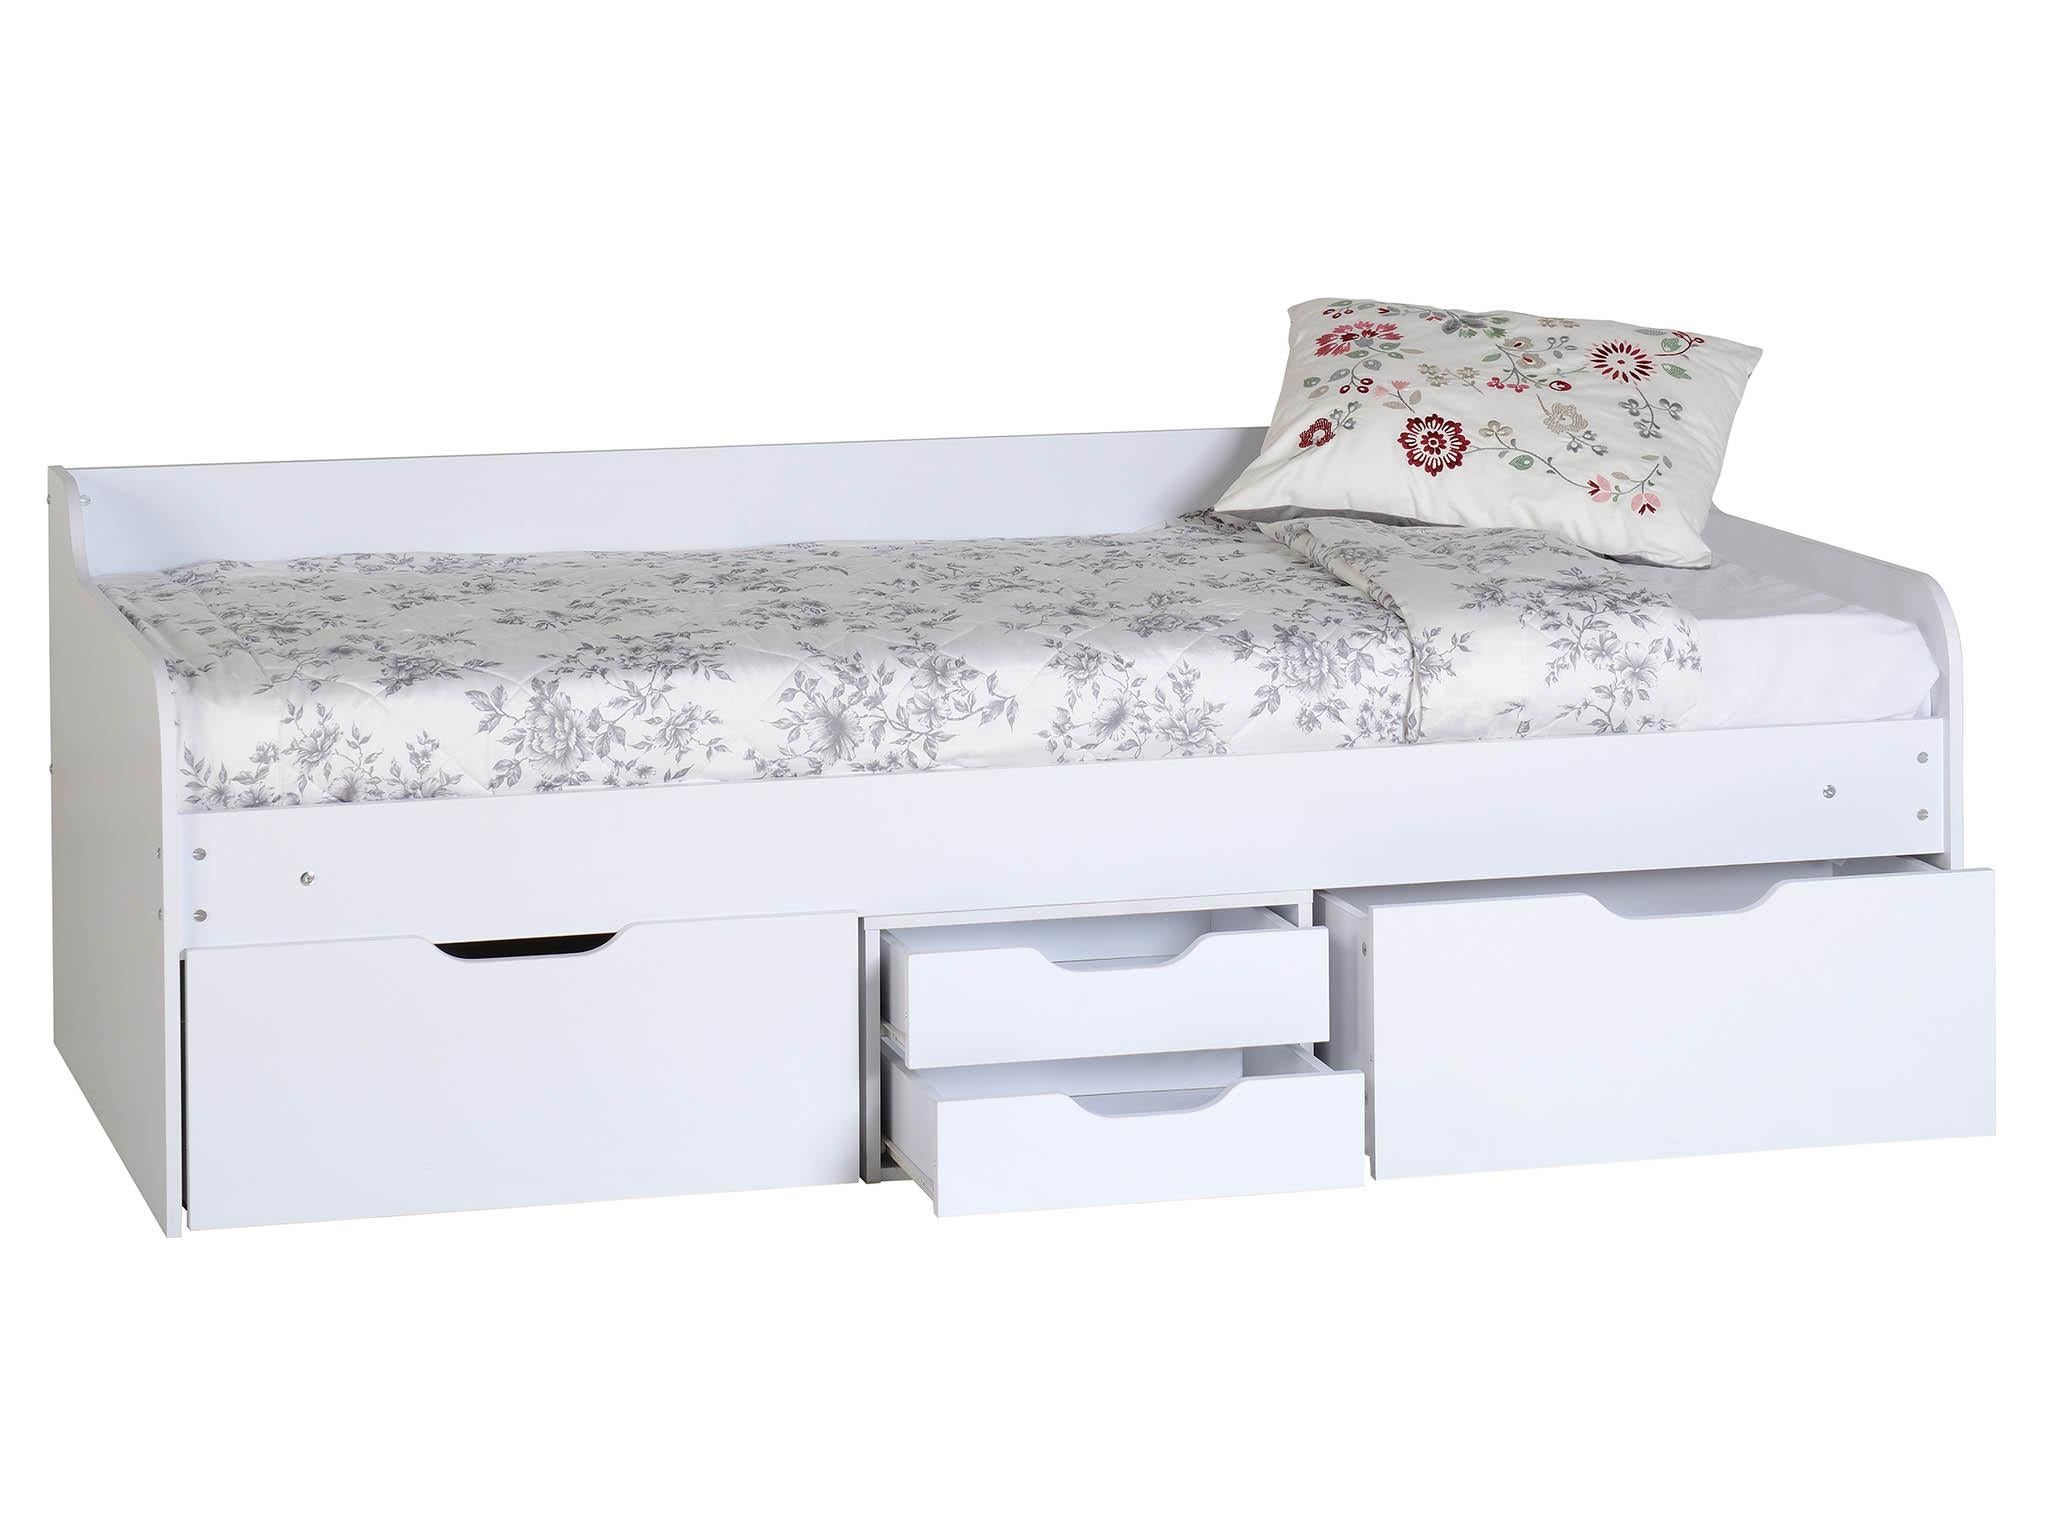 girls single beds with storage